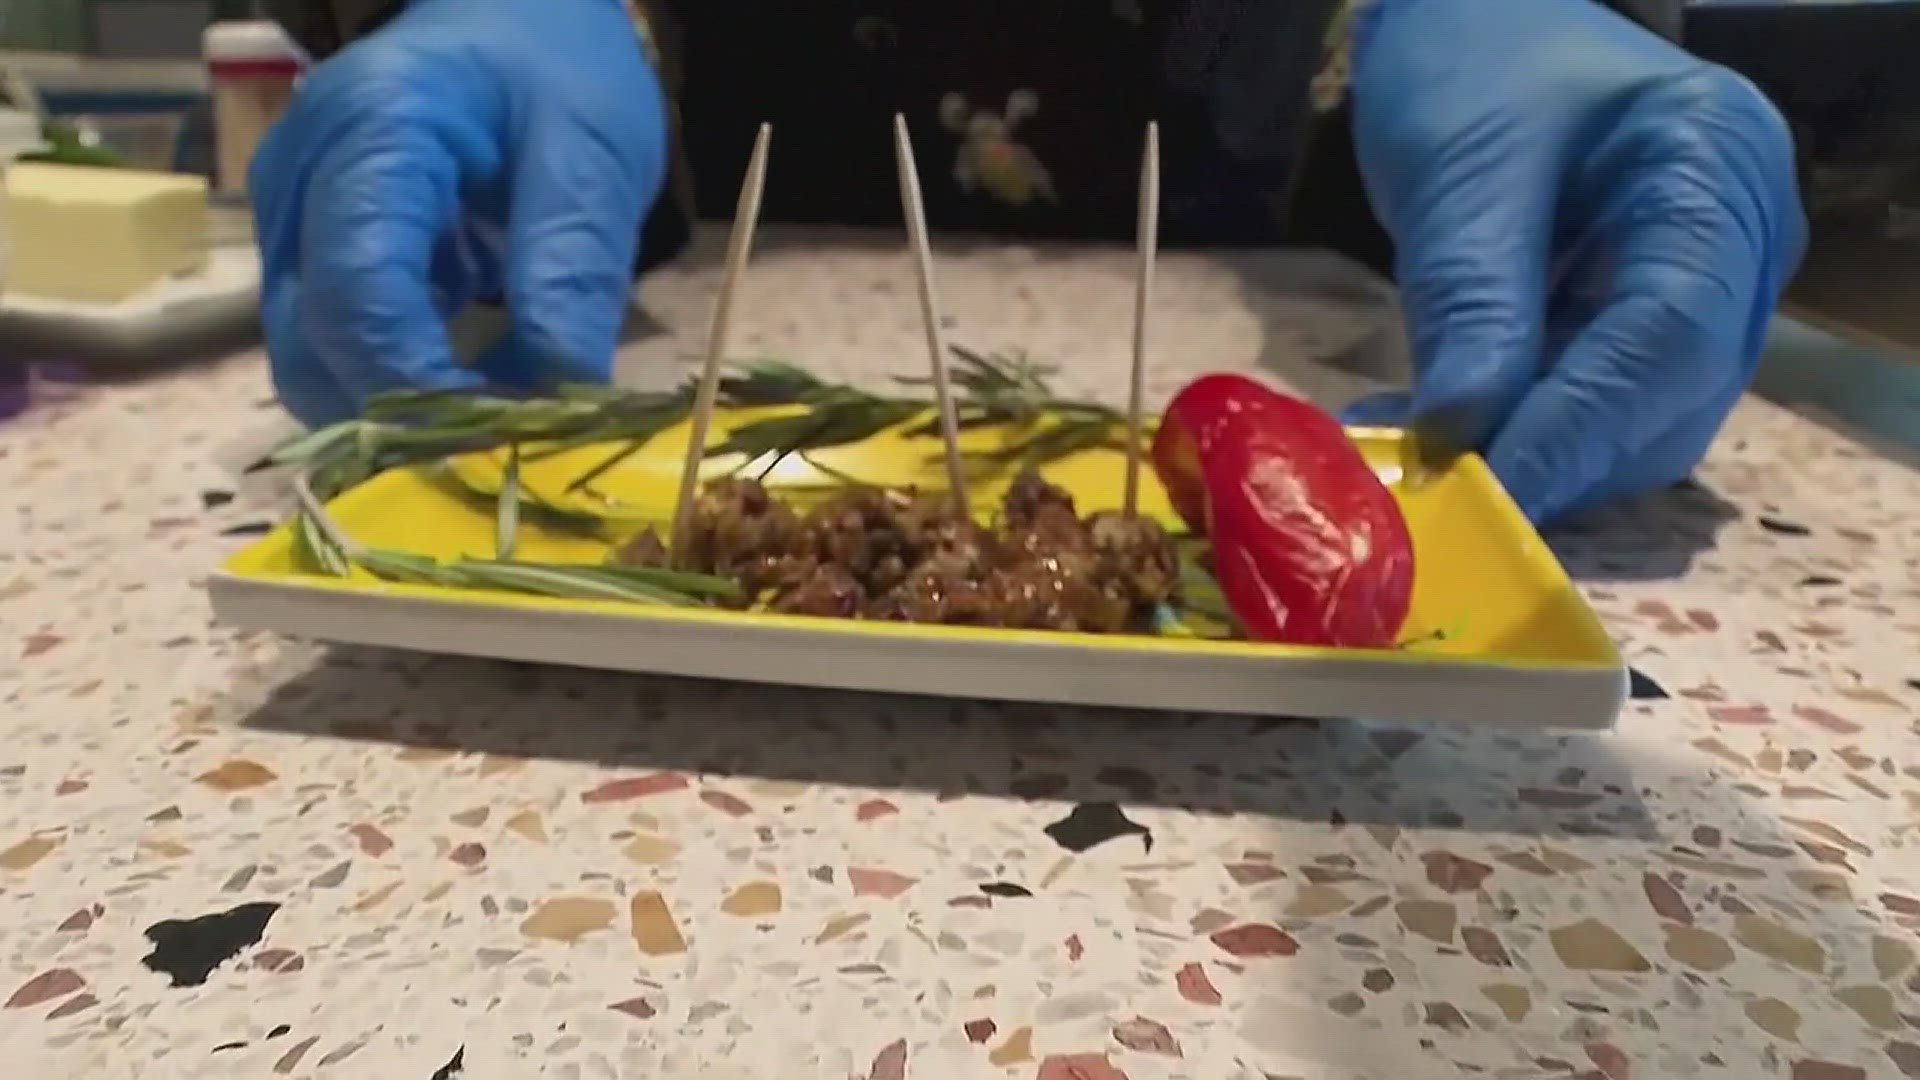 This insectarium is serving up odd snacks like southwestern waxworms and cricket king cakes.